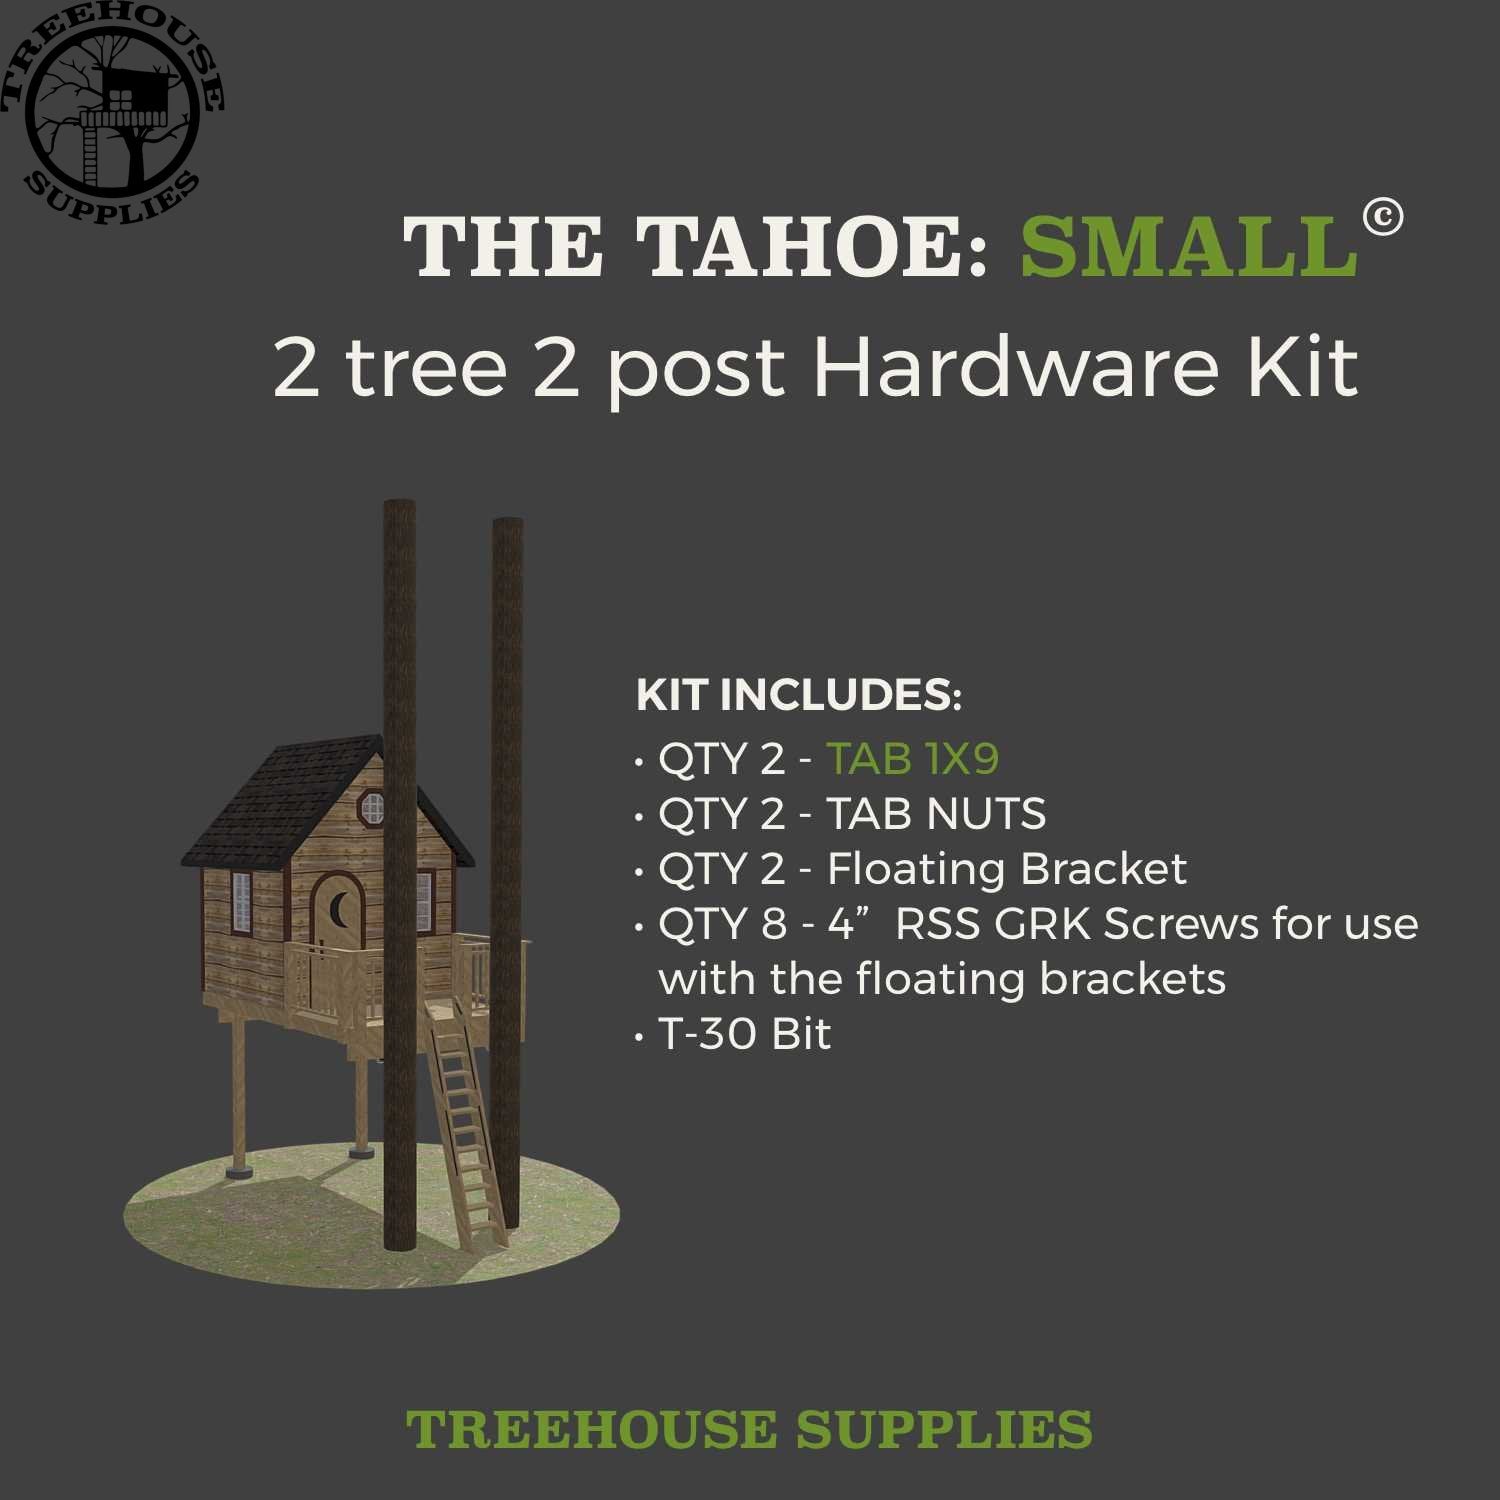 Treehouse Supplies THE TAHOE: SMALL © 2 tree 2 post hardware kit 